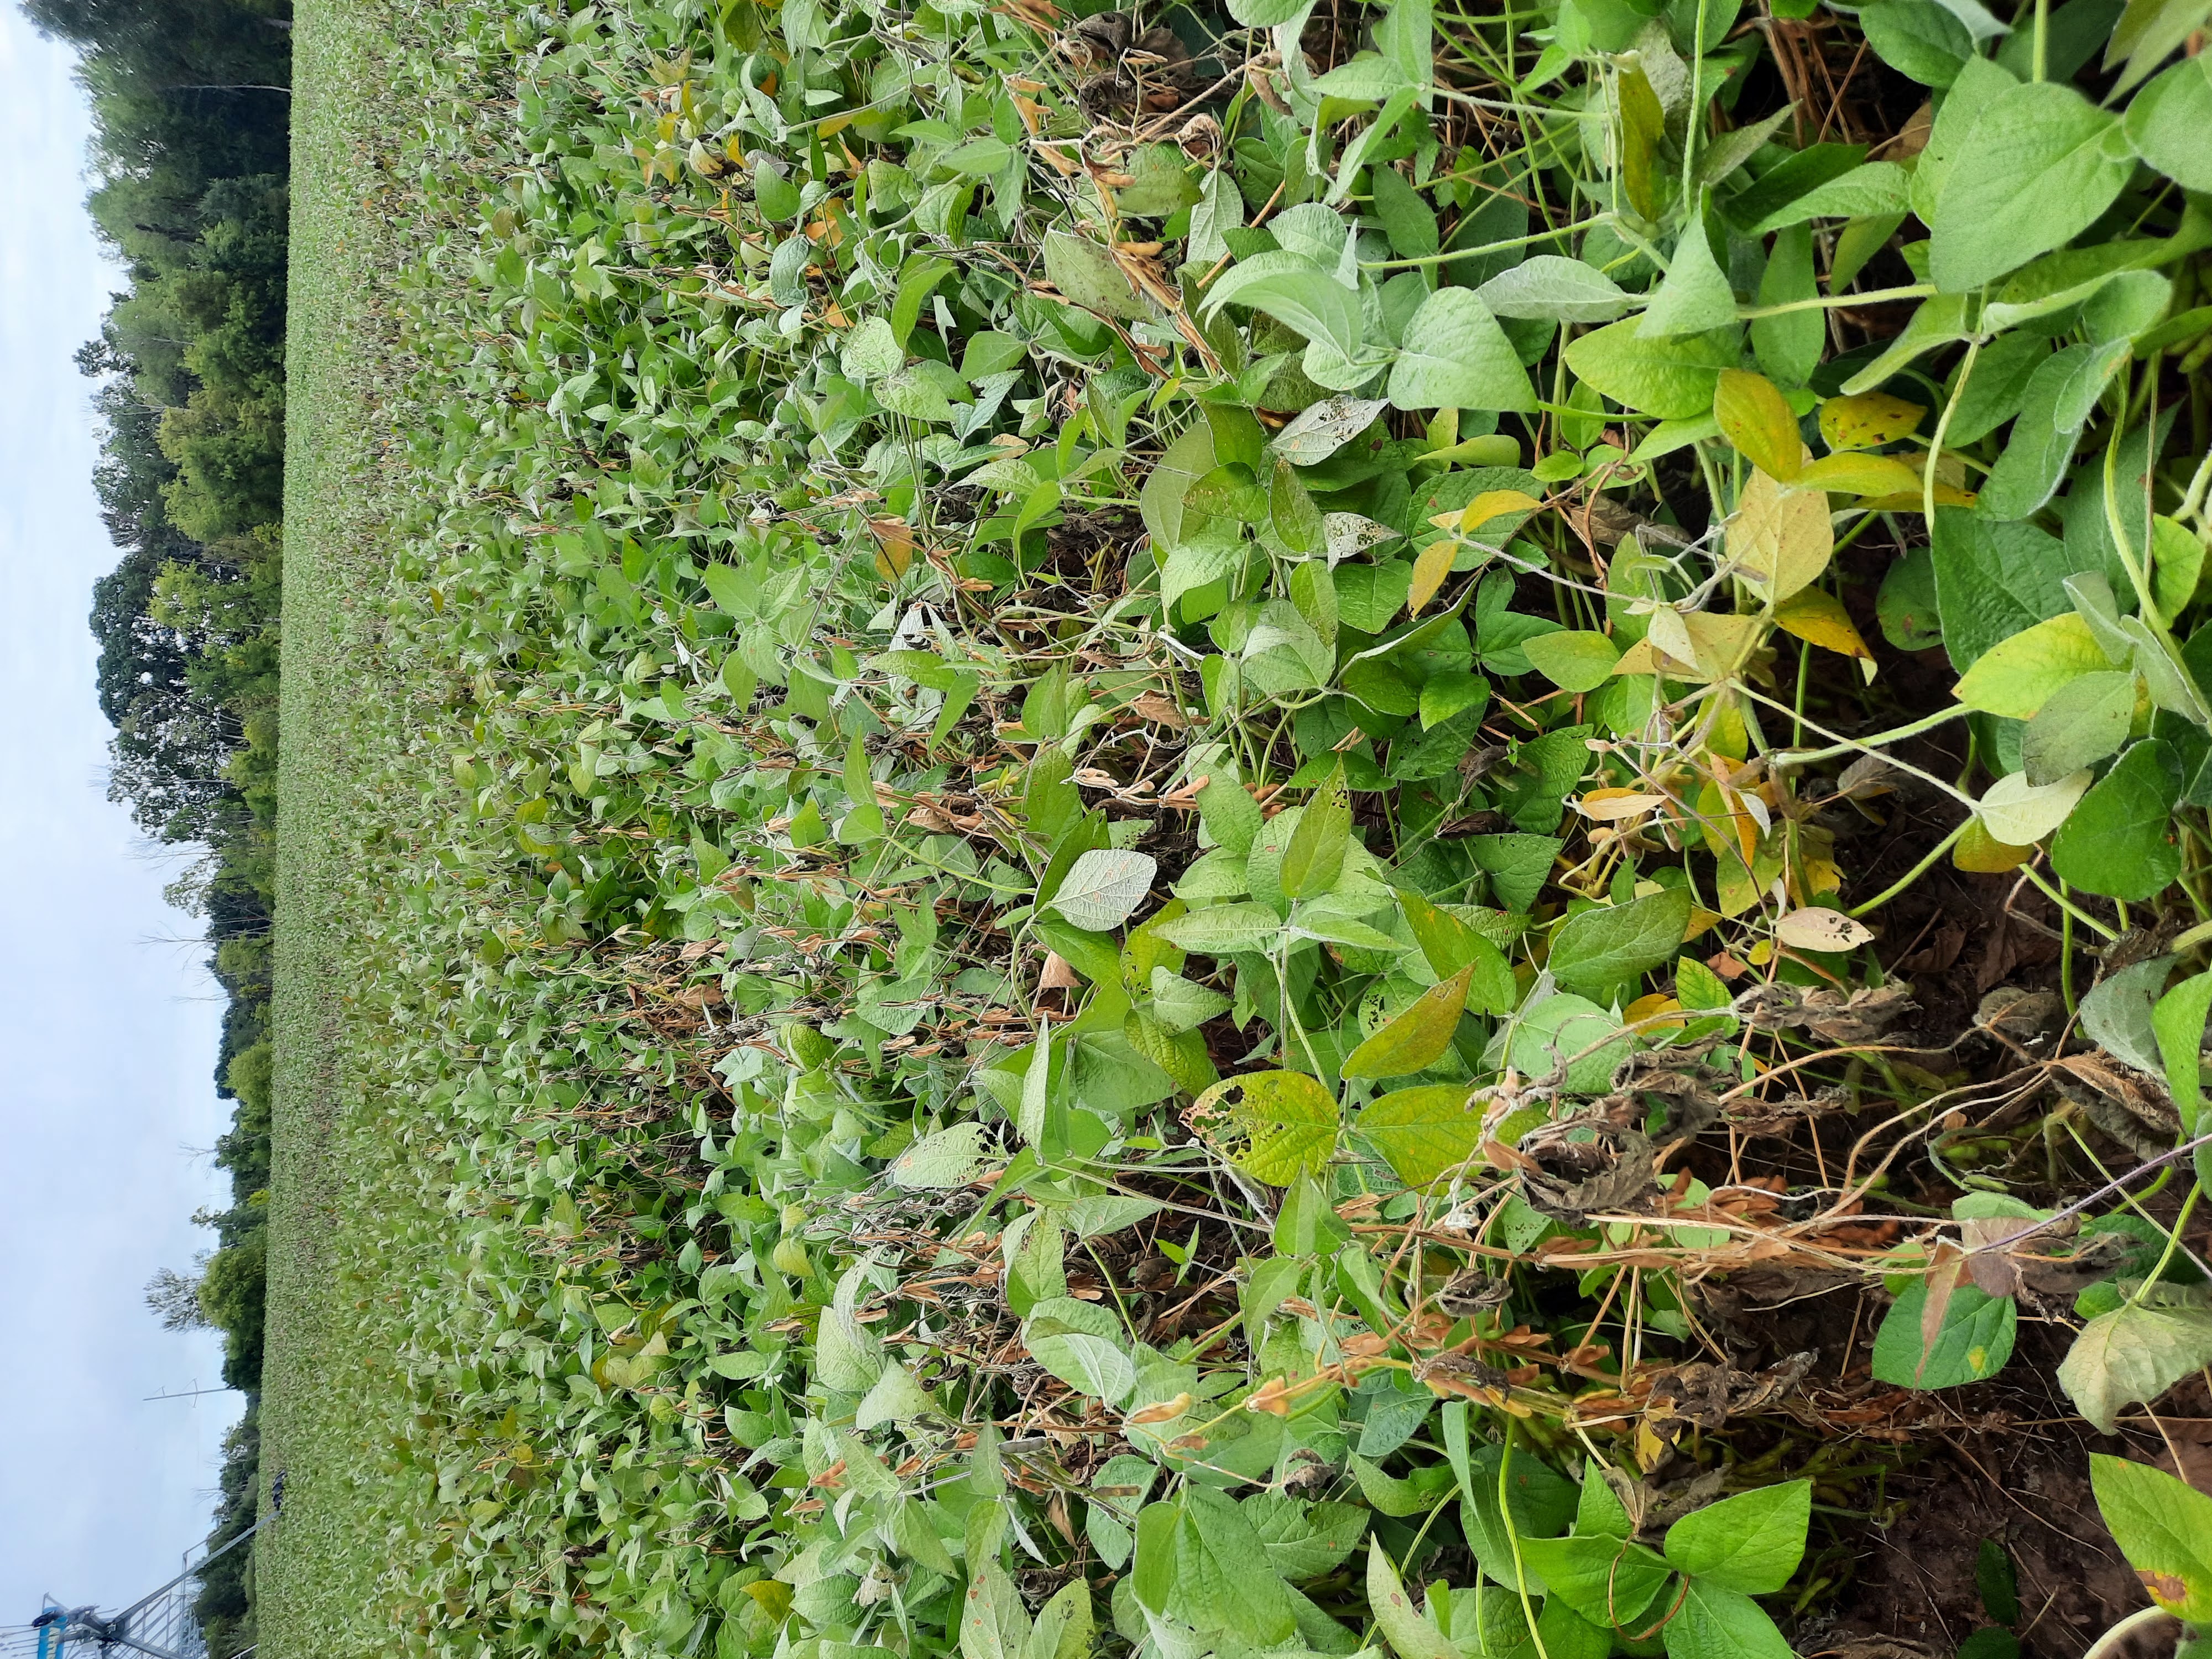 soybean field with white mold